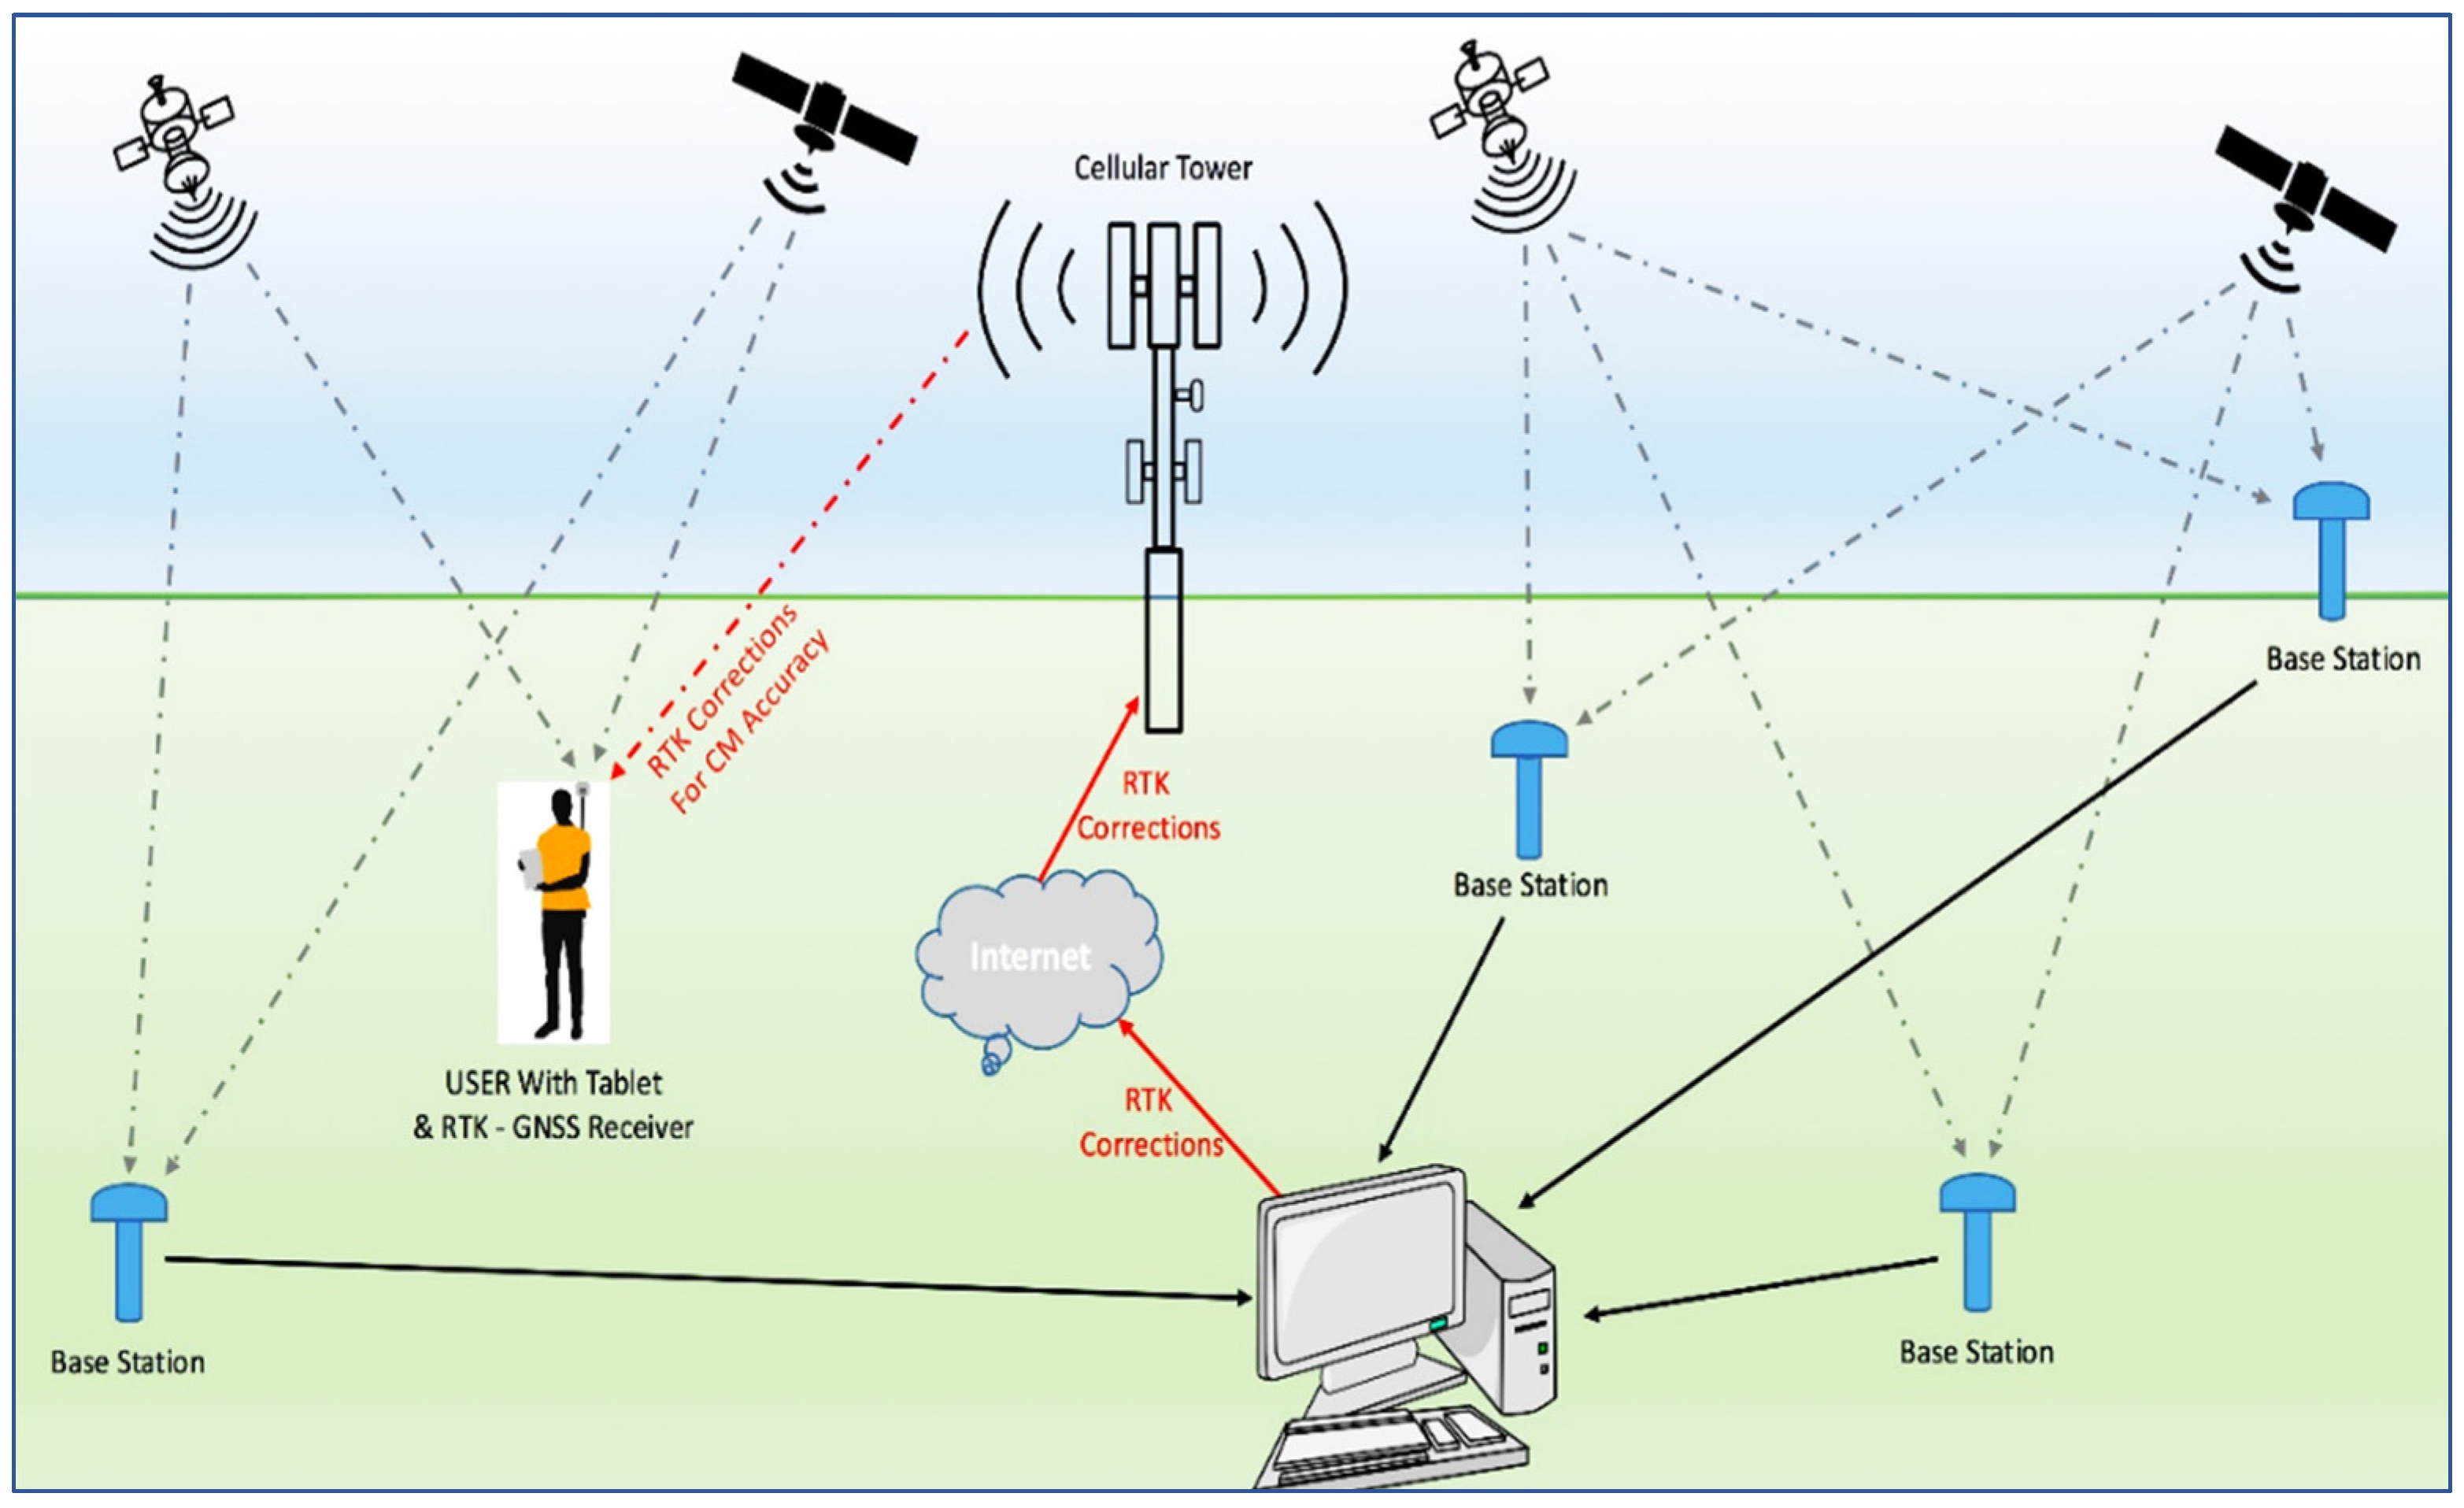 Why secure GPS receivers are crucial for GNSS/INS systems?